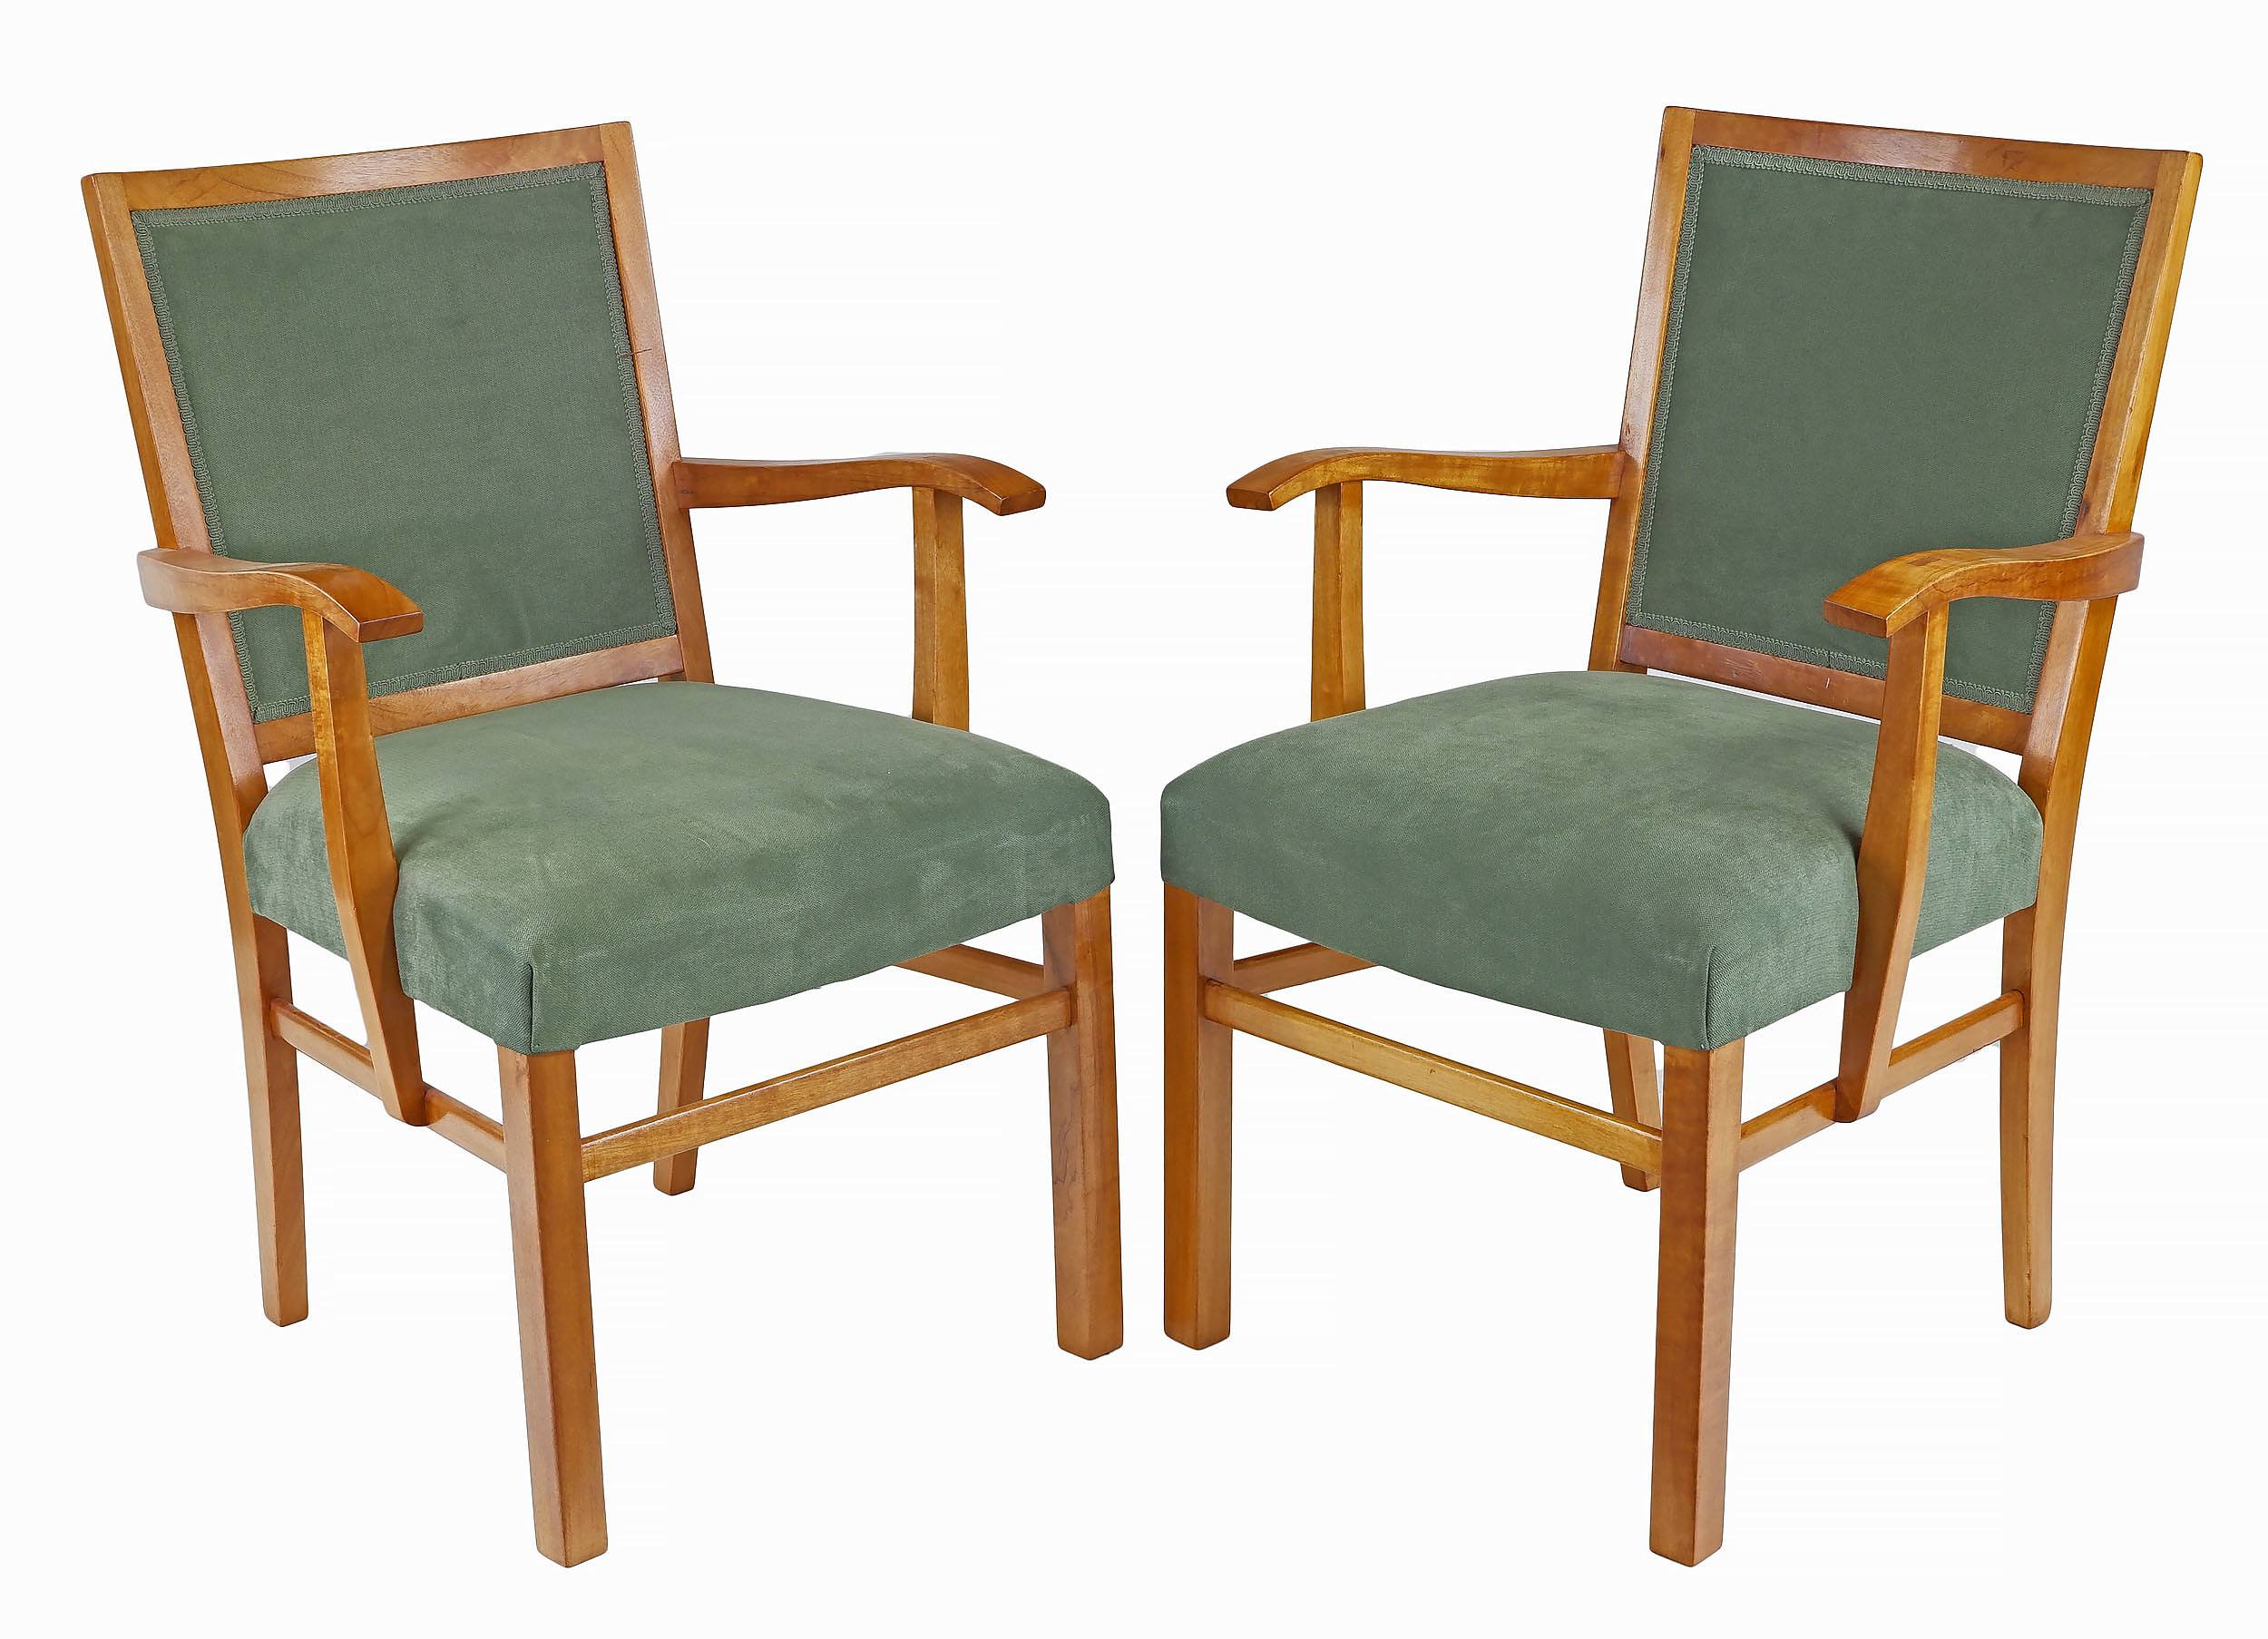 'Pair of Fred Ward Maple Armchairs'